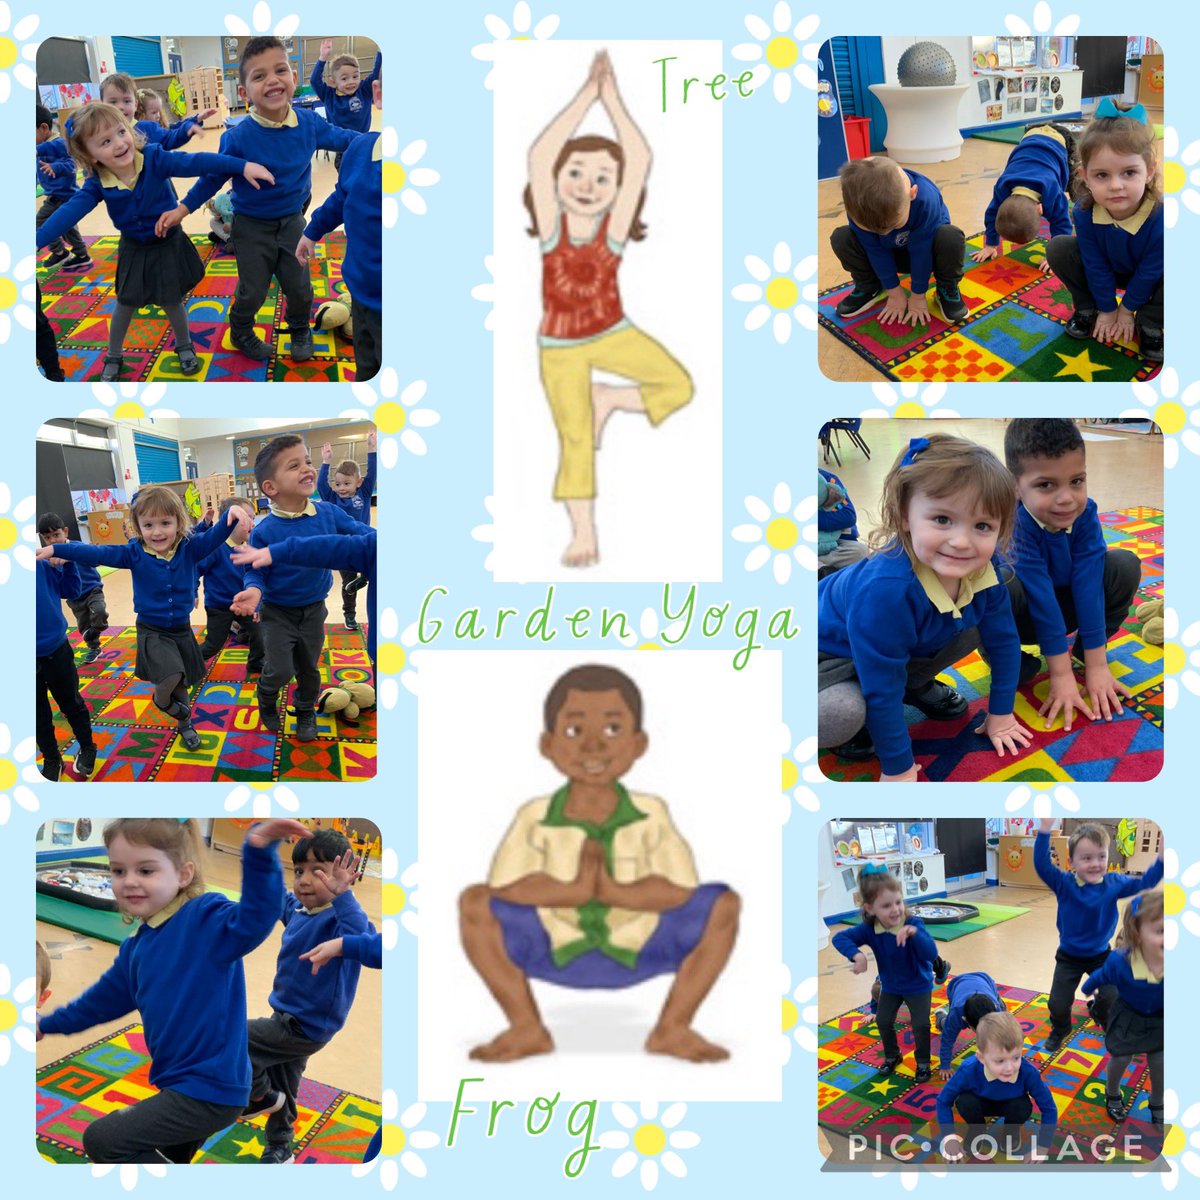 Today we did Garden Yoga 🧘‍♀️ 🧘‍♂️ We learnt the tree pose and the frog pose #RyFwellbeing #HealthyHarri @rhosyfedwen